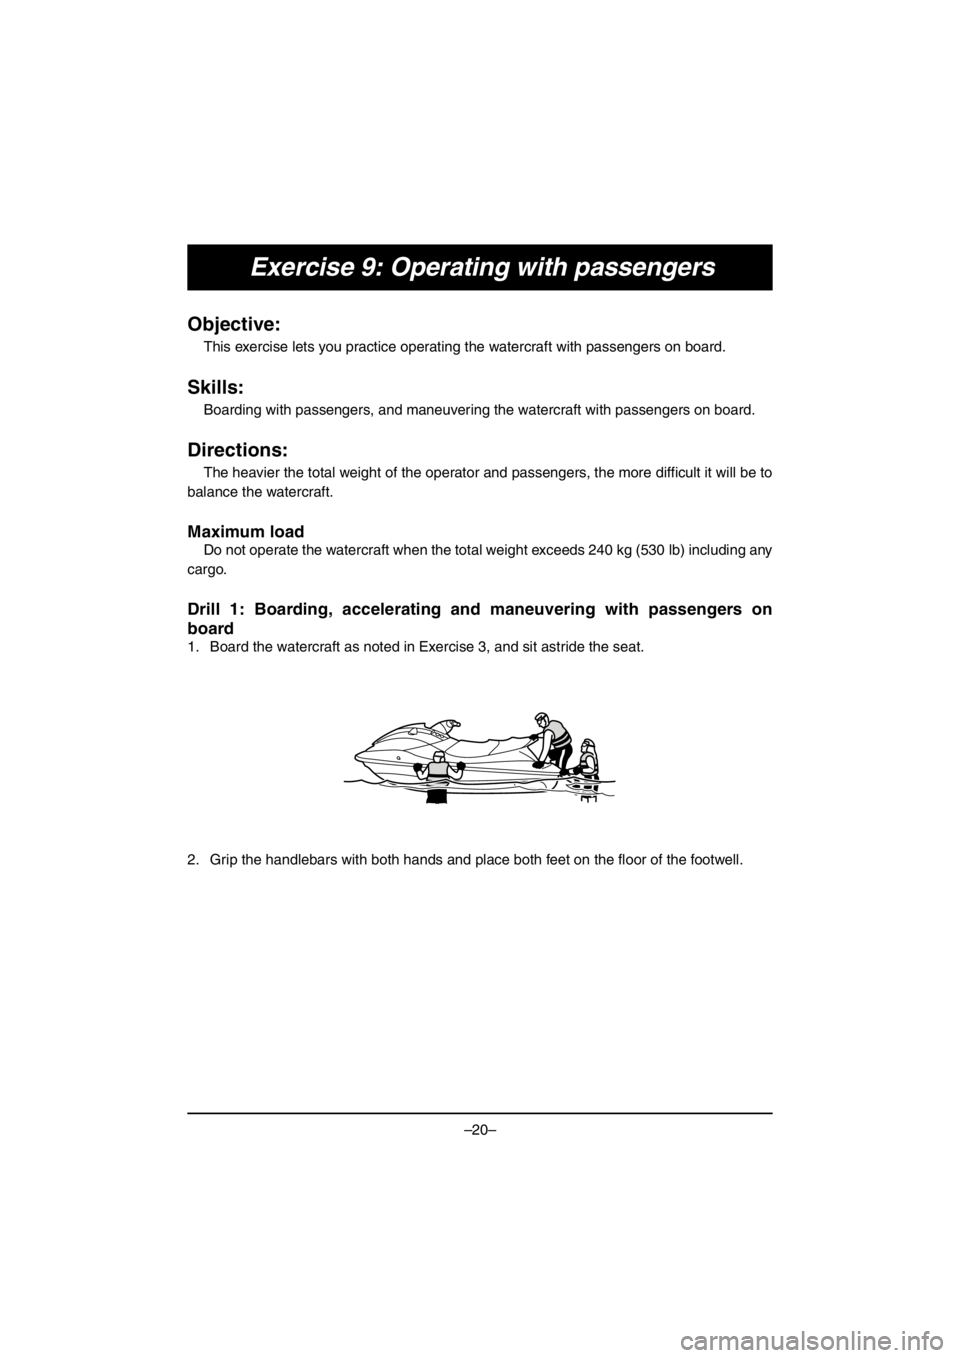 YAMAHA V1 2016  Notices Demploi (in French) –20–
Exercise 9: Operating with passengers
Objective:
This exercise lets you practice operating the watercraft with passengers on board.
Skills:
Boarding with passengers, and maneuvering the water